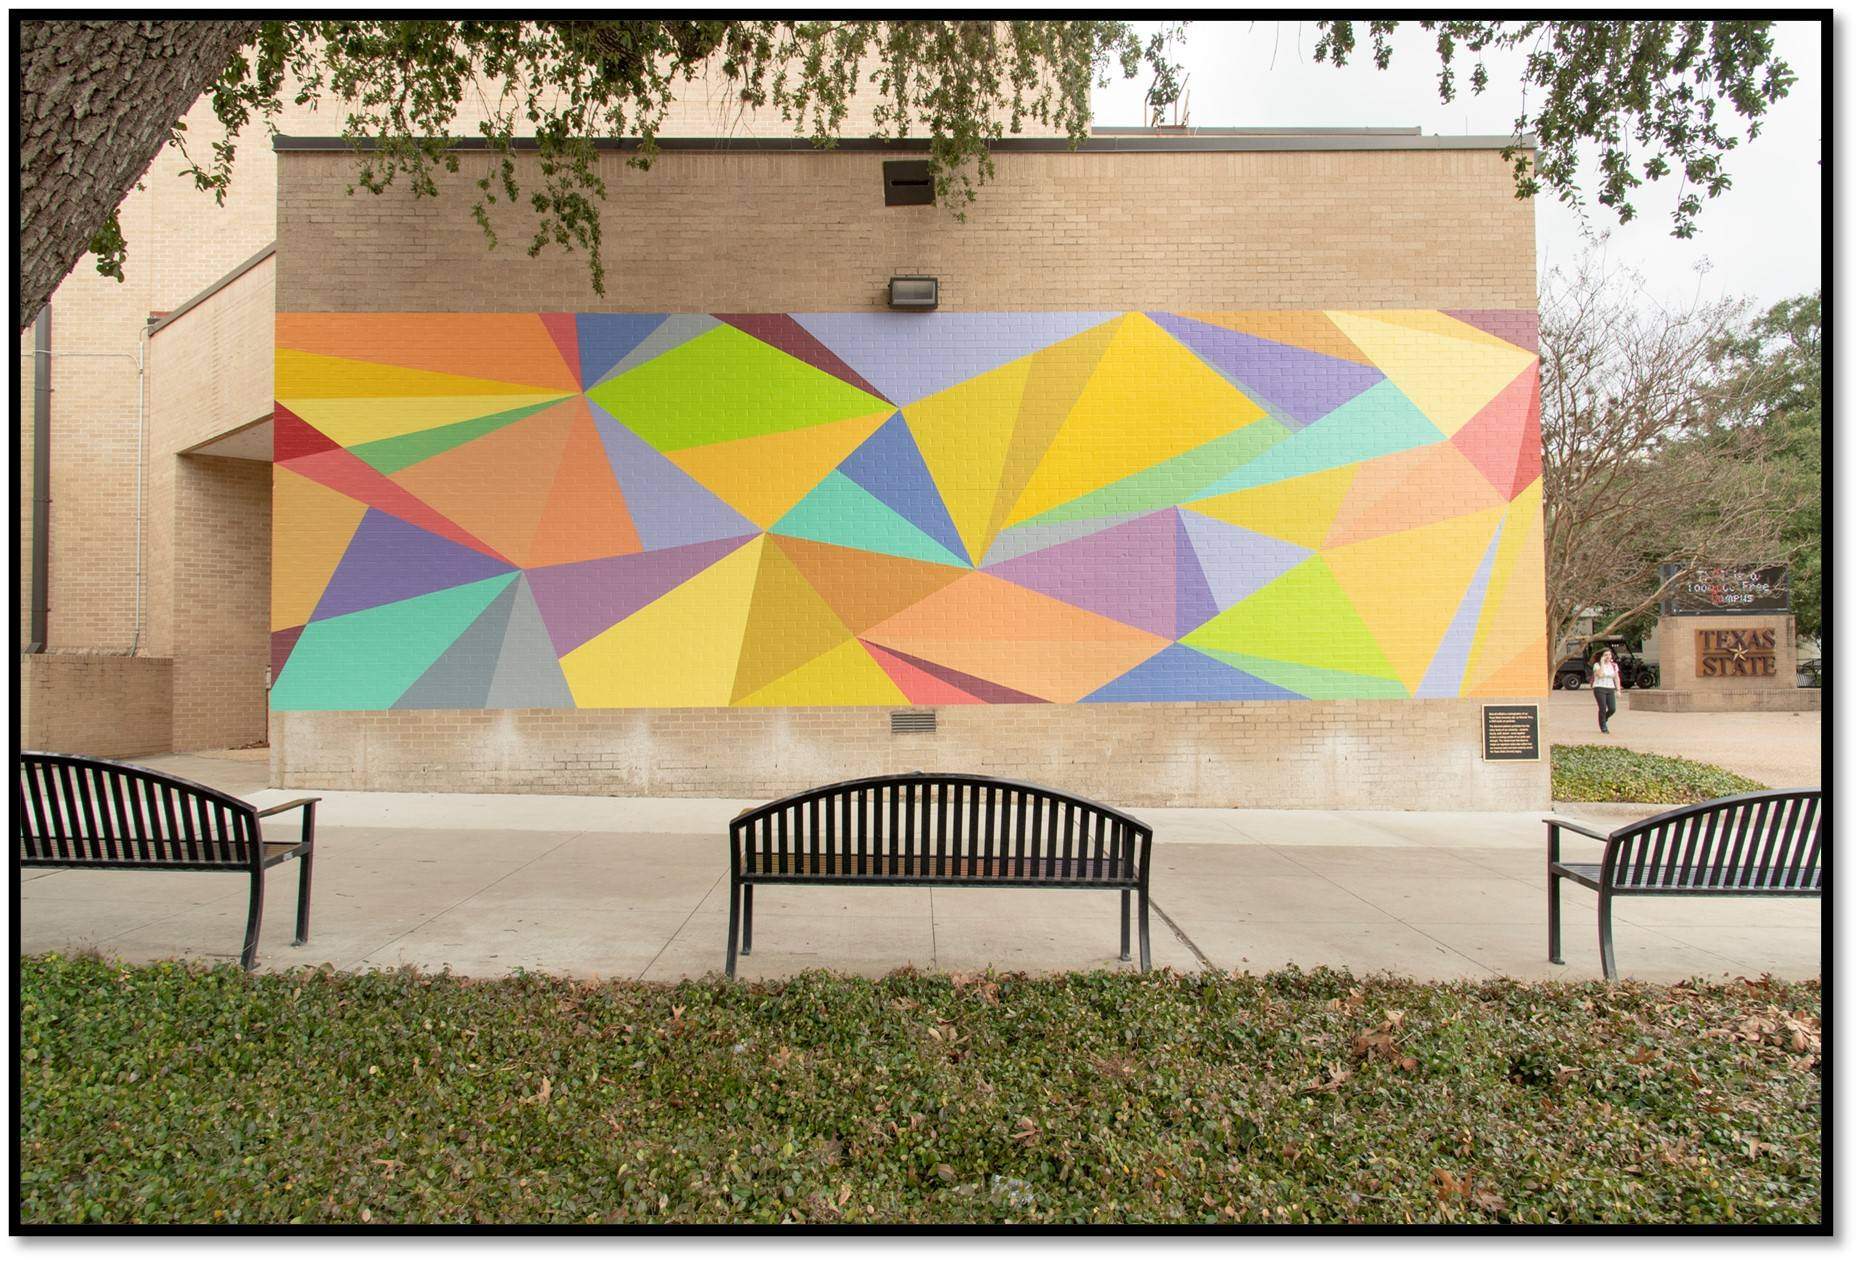 colorful abstract mural located on campus